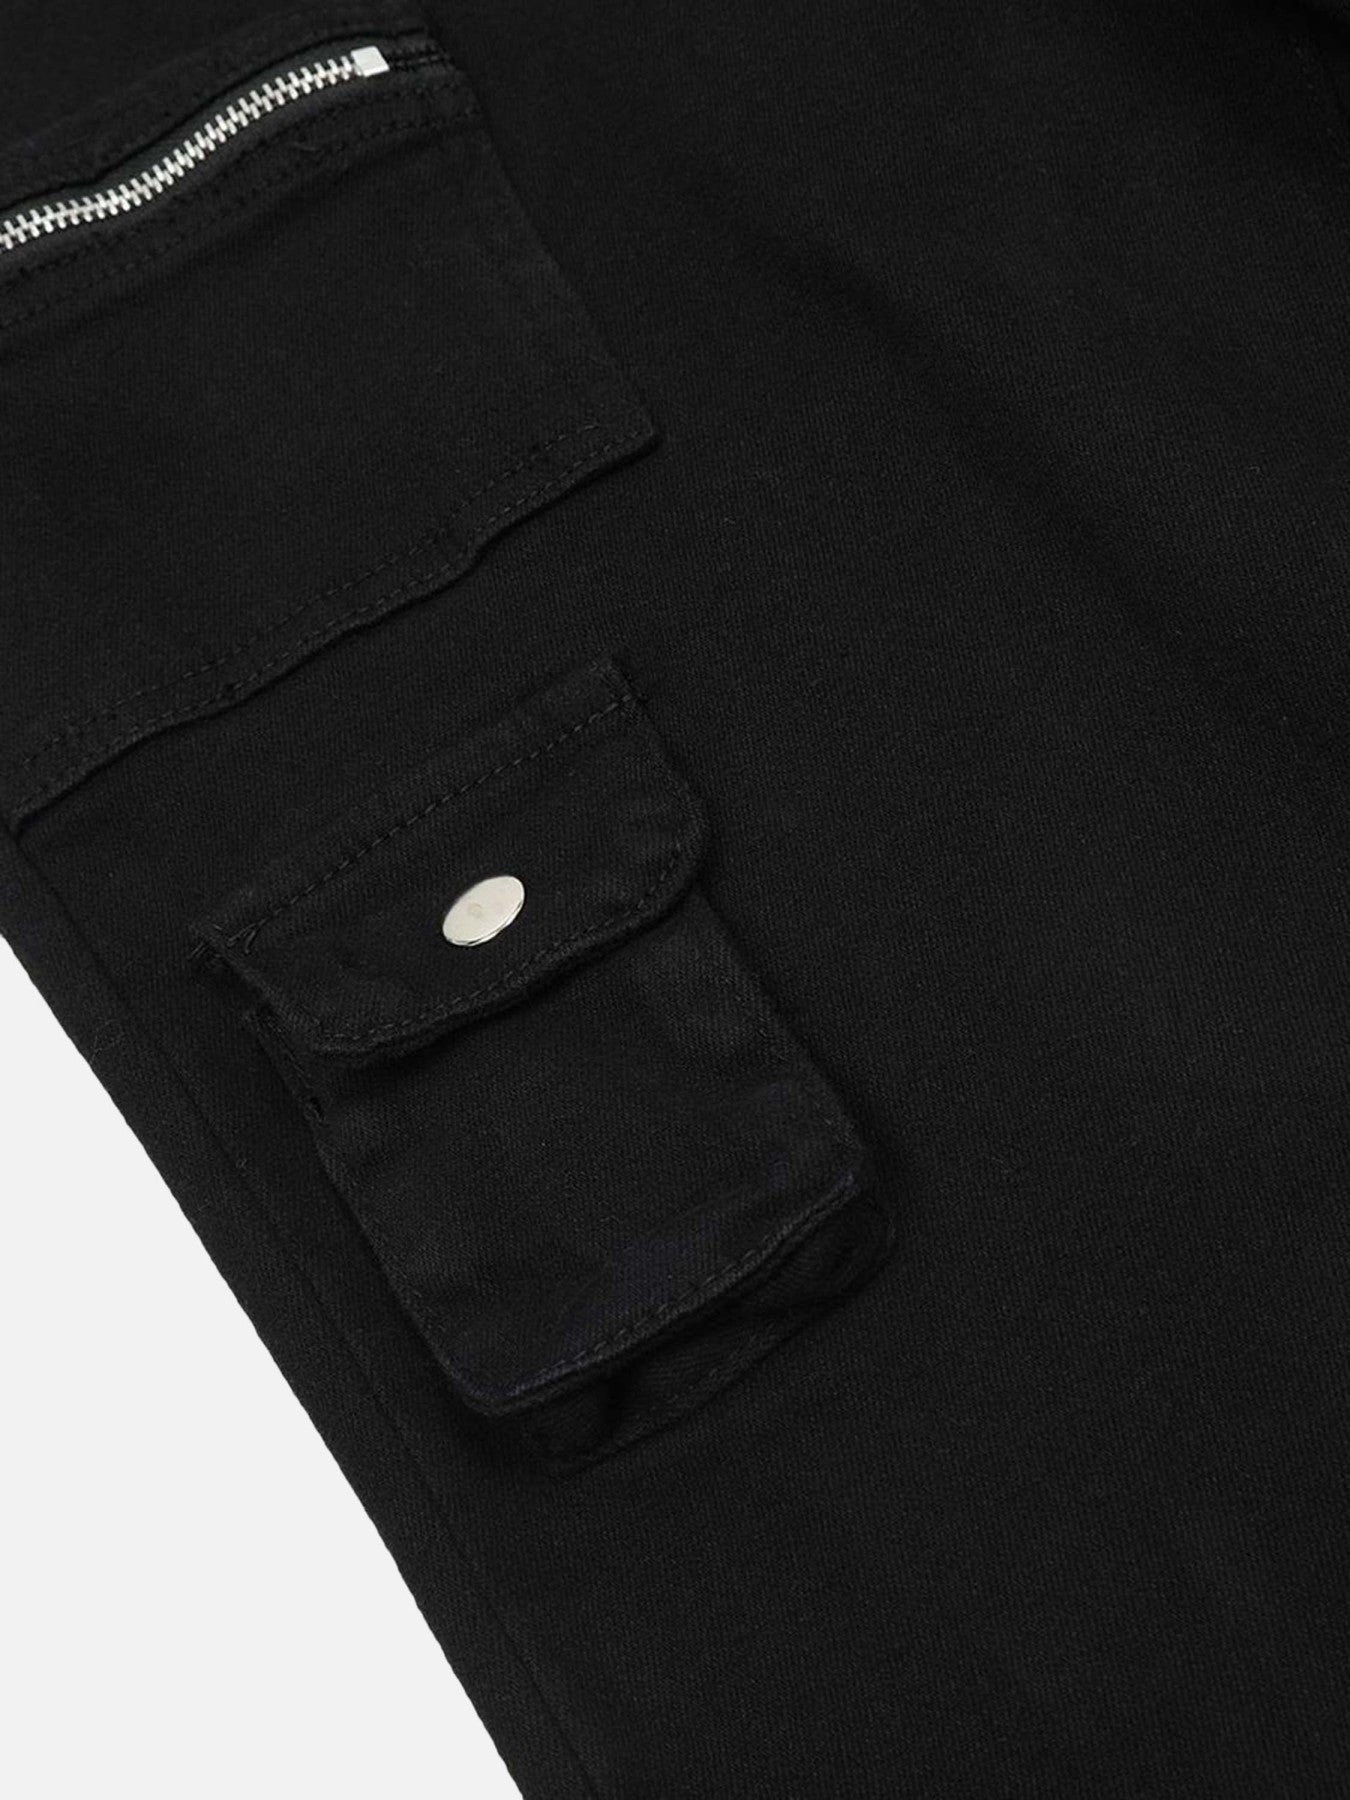 Thesupermade Work Pocket Jeans